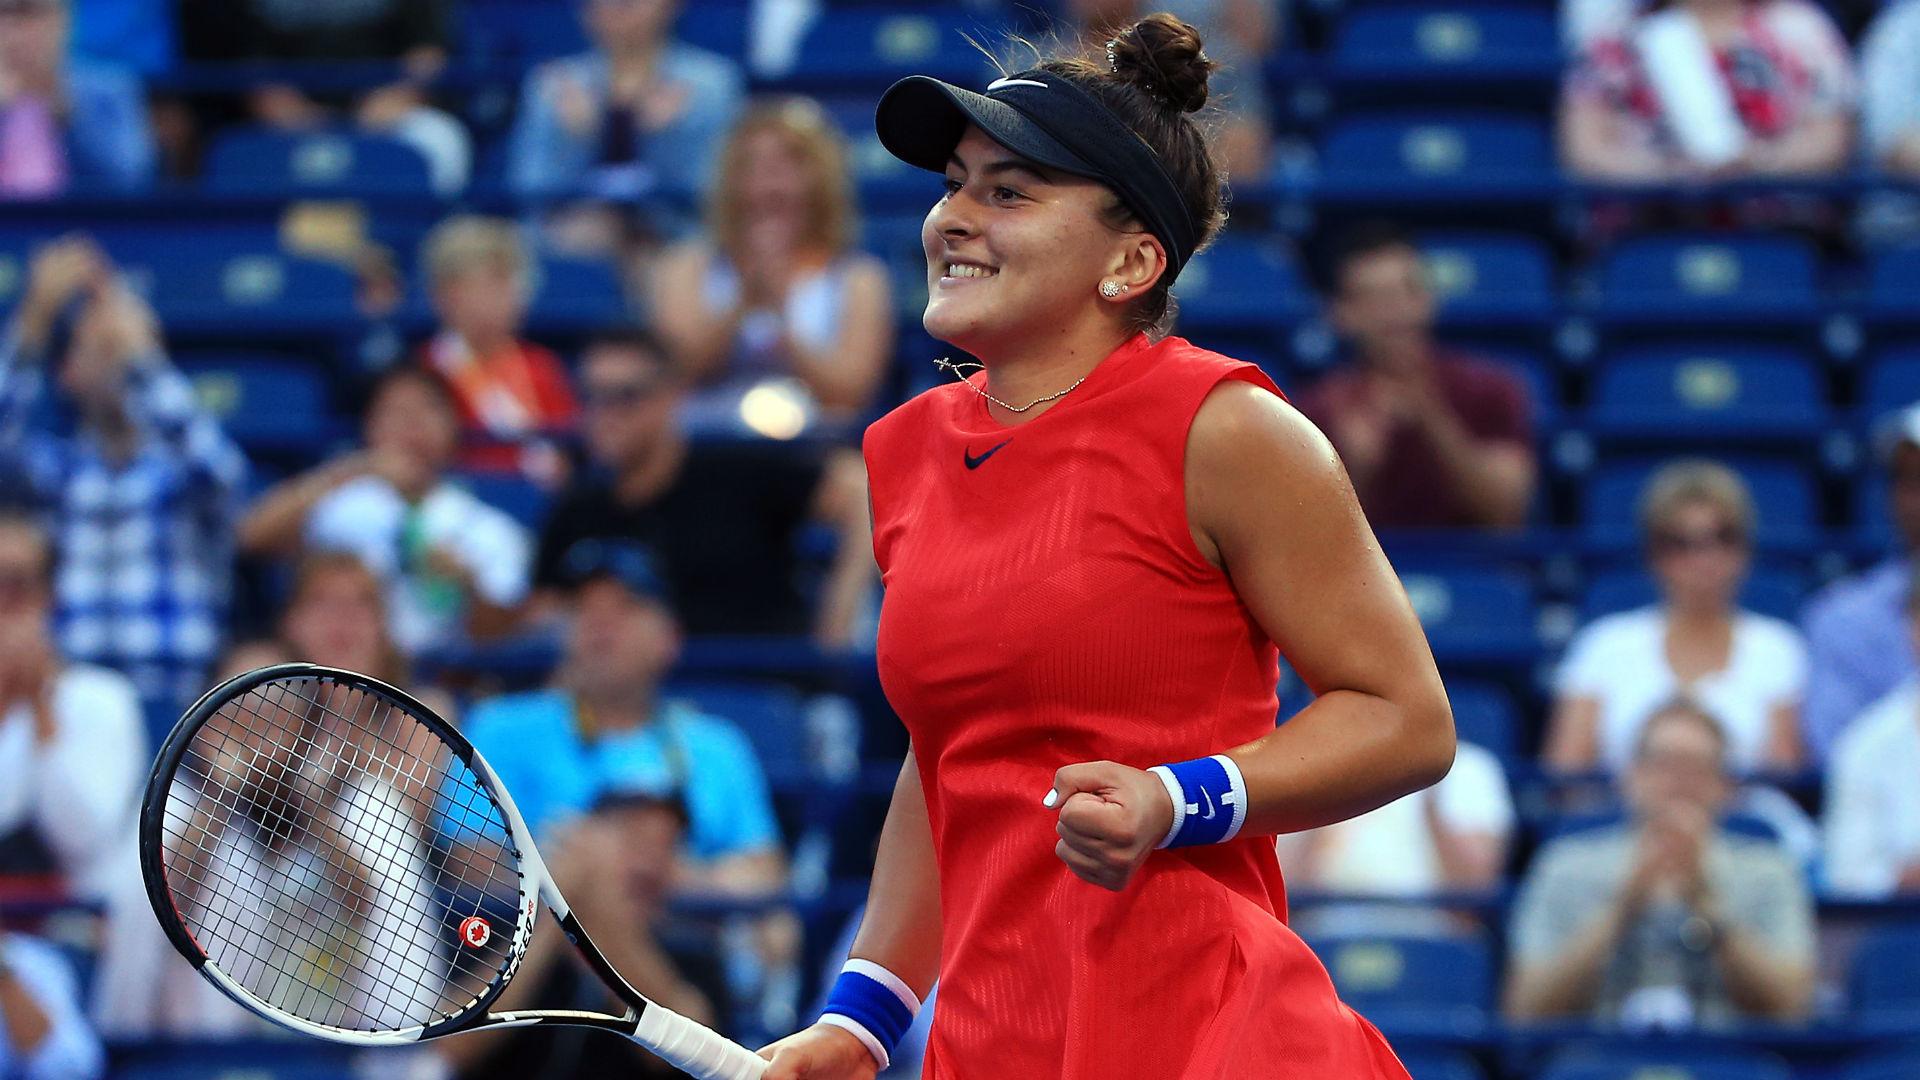 French Open 2018: Bianca Andreescu advances to final qualifying